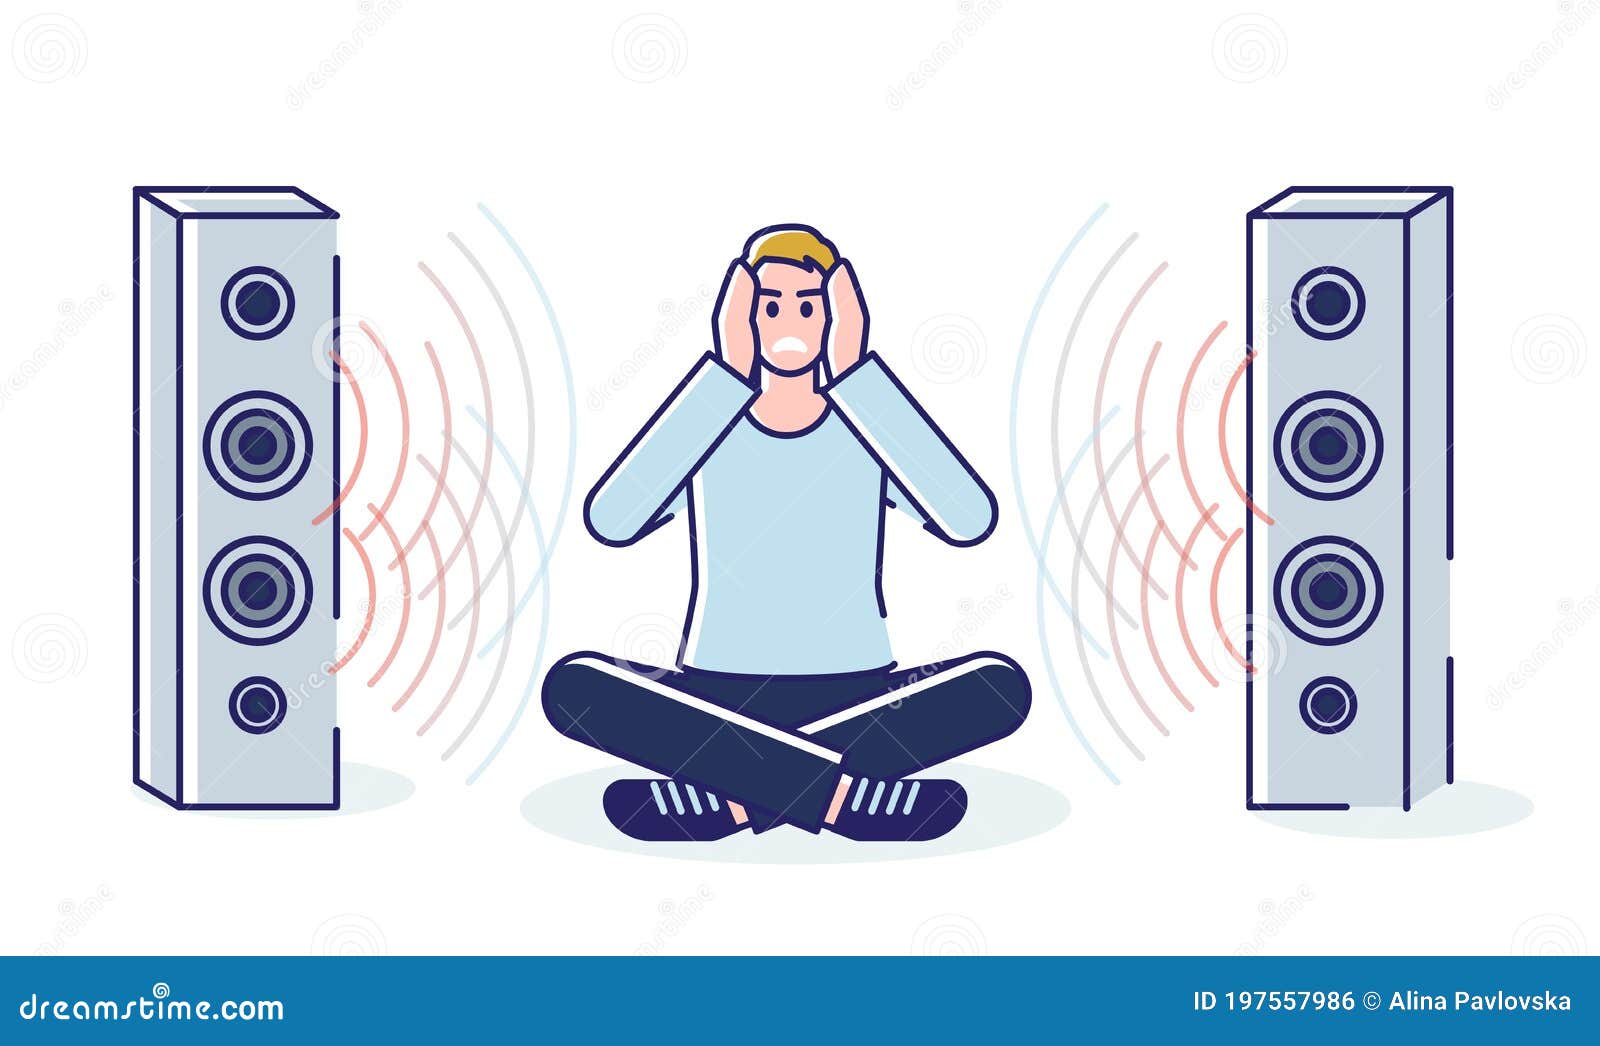 Man Tired of Loud Music from Loudspeakers Covering Ears with Hands Sitting  on Floor Stock Vector - Illustration of noisy, loud: 197557986